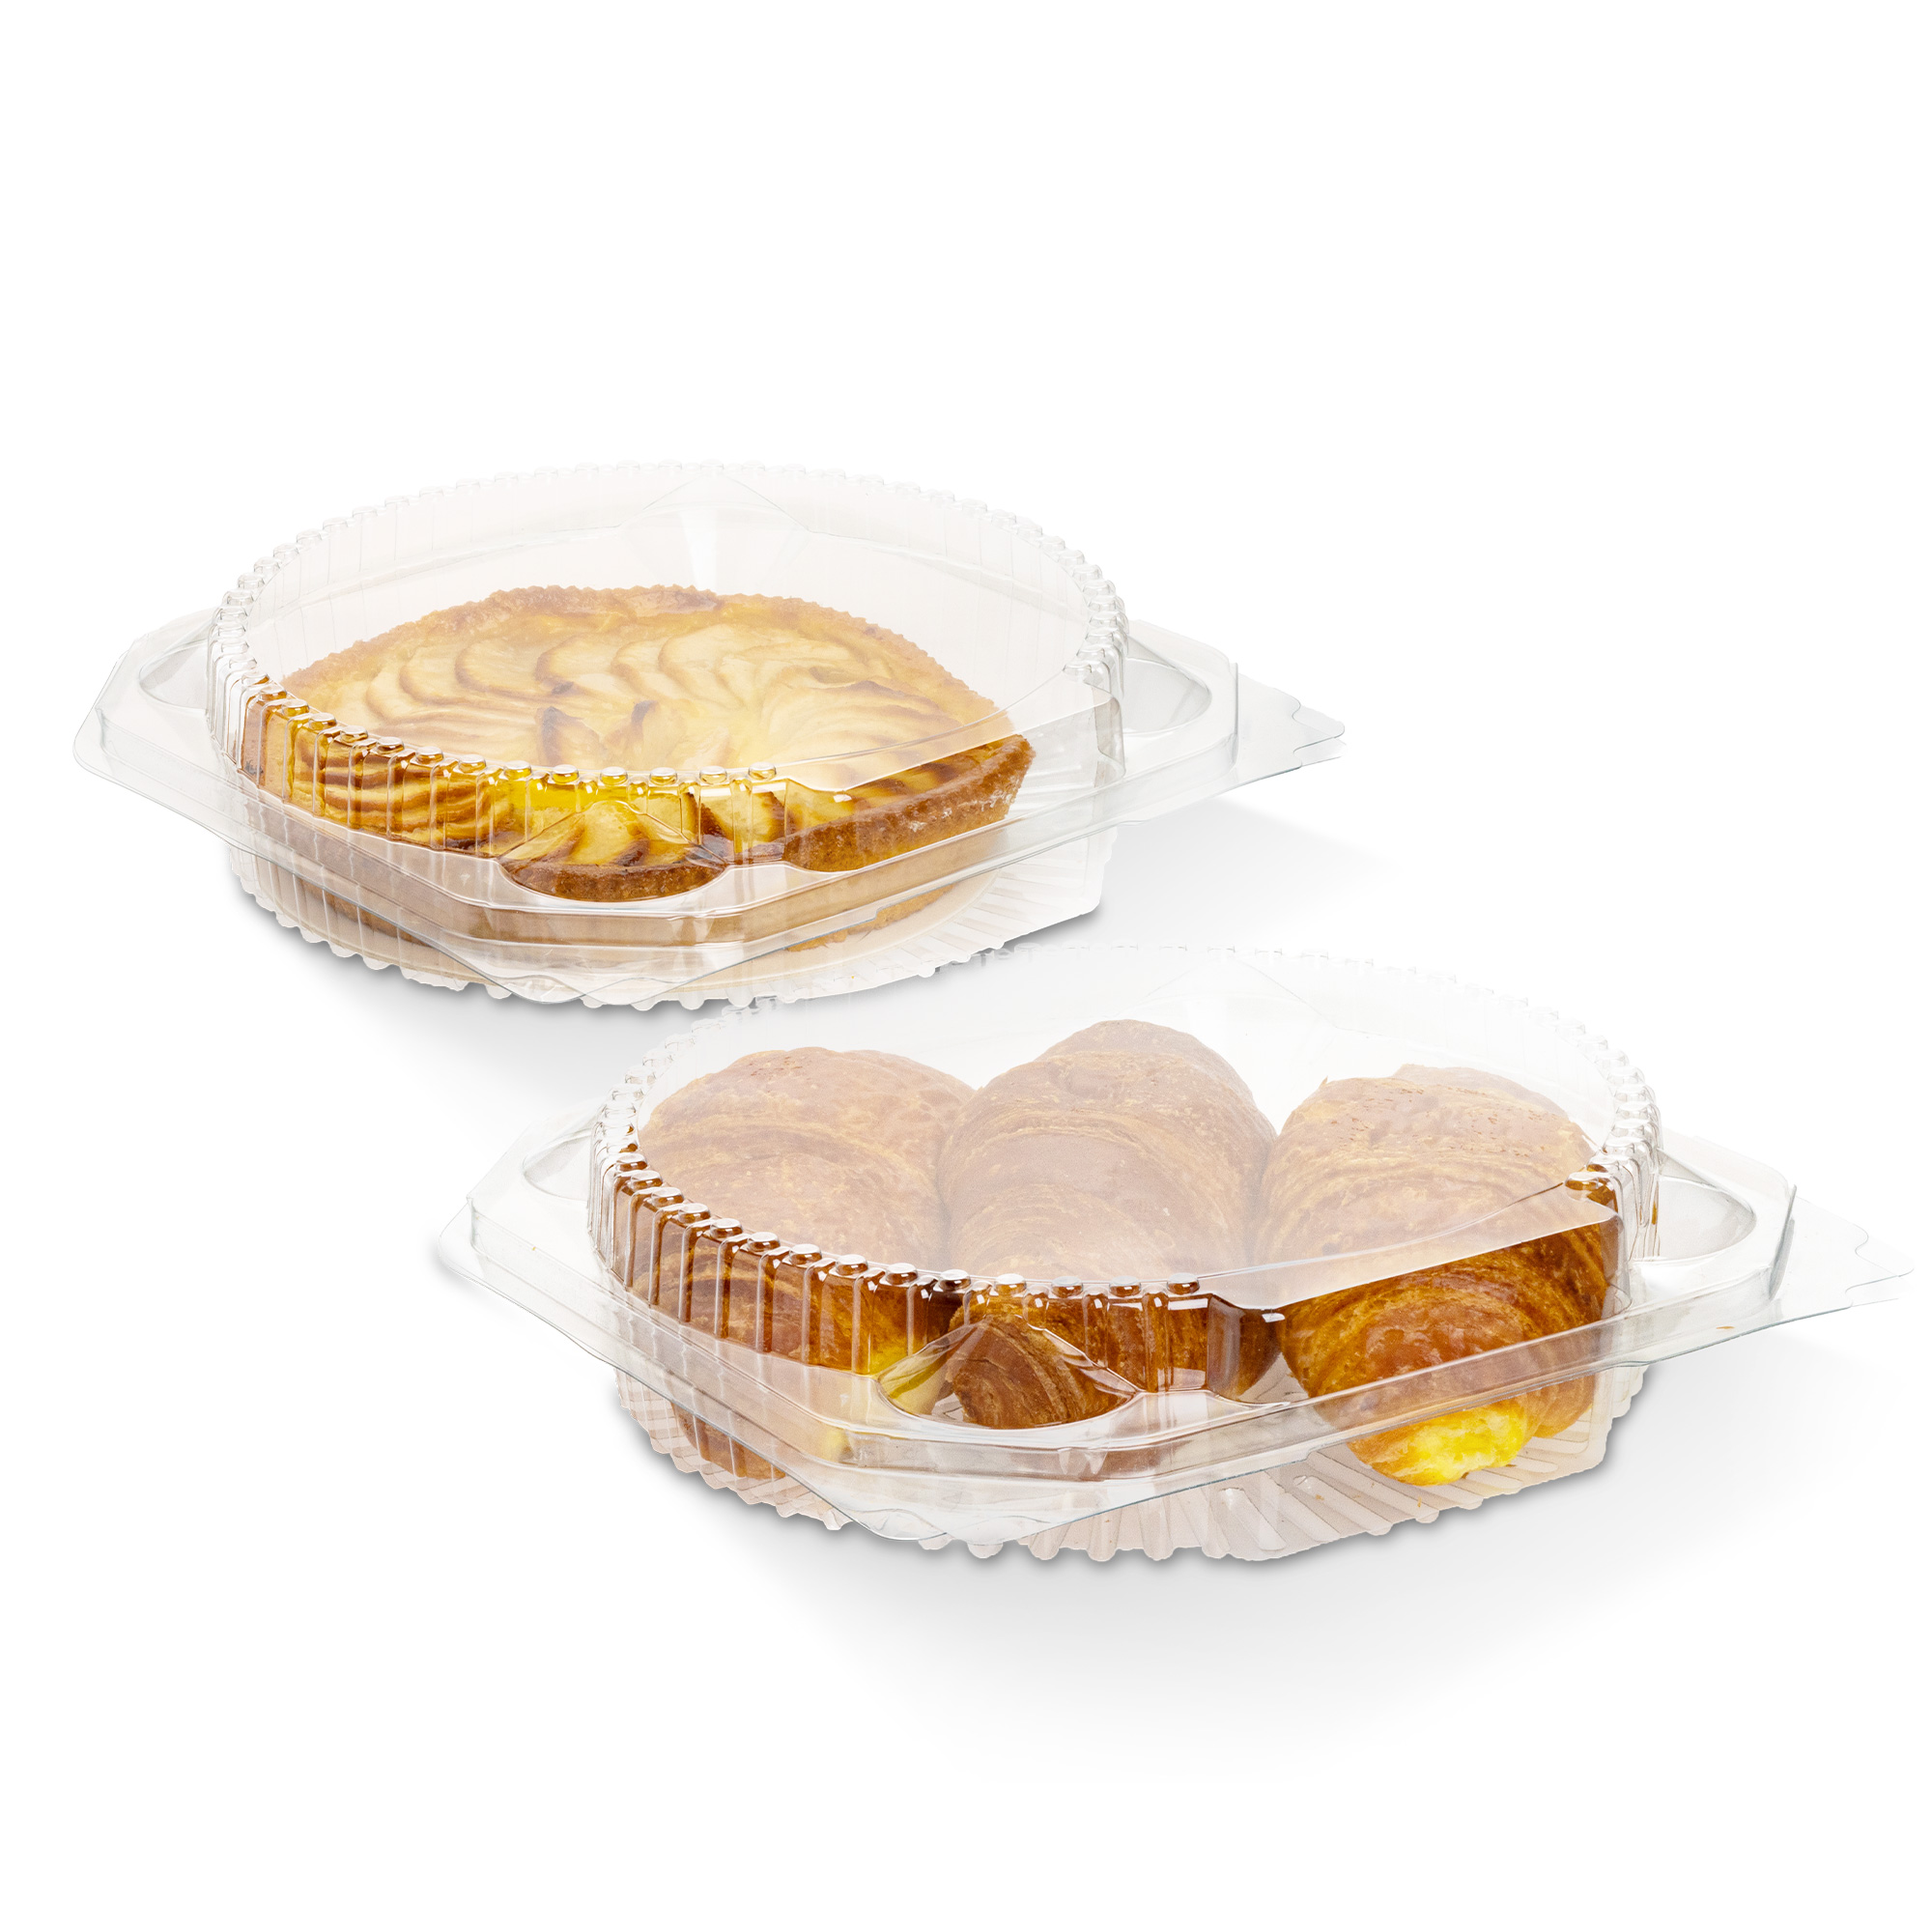 A cake and pastries in plastic trays with lids